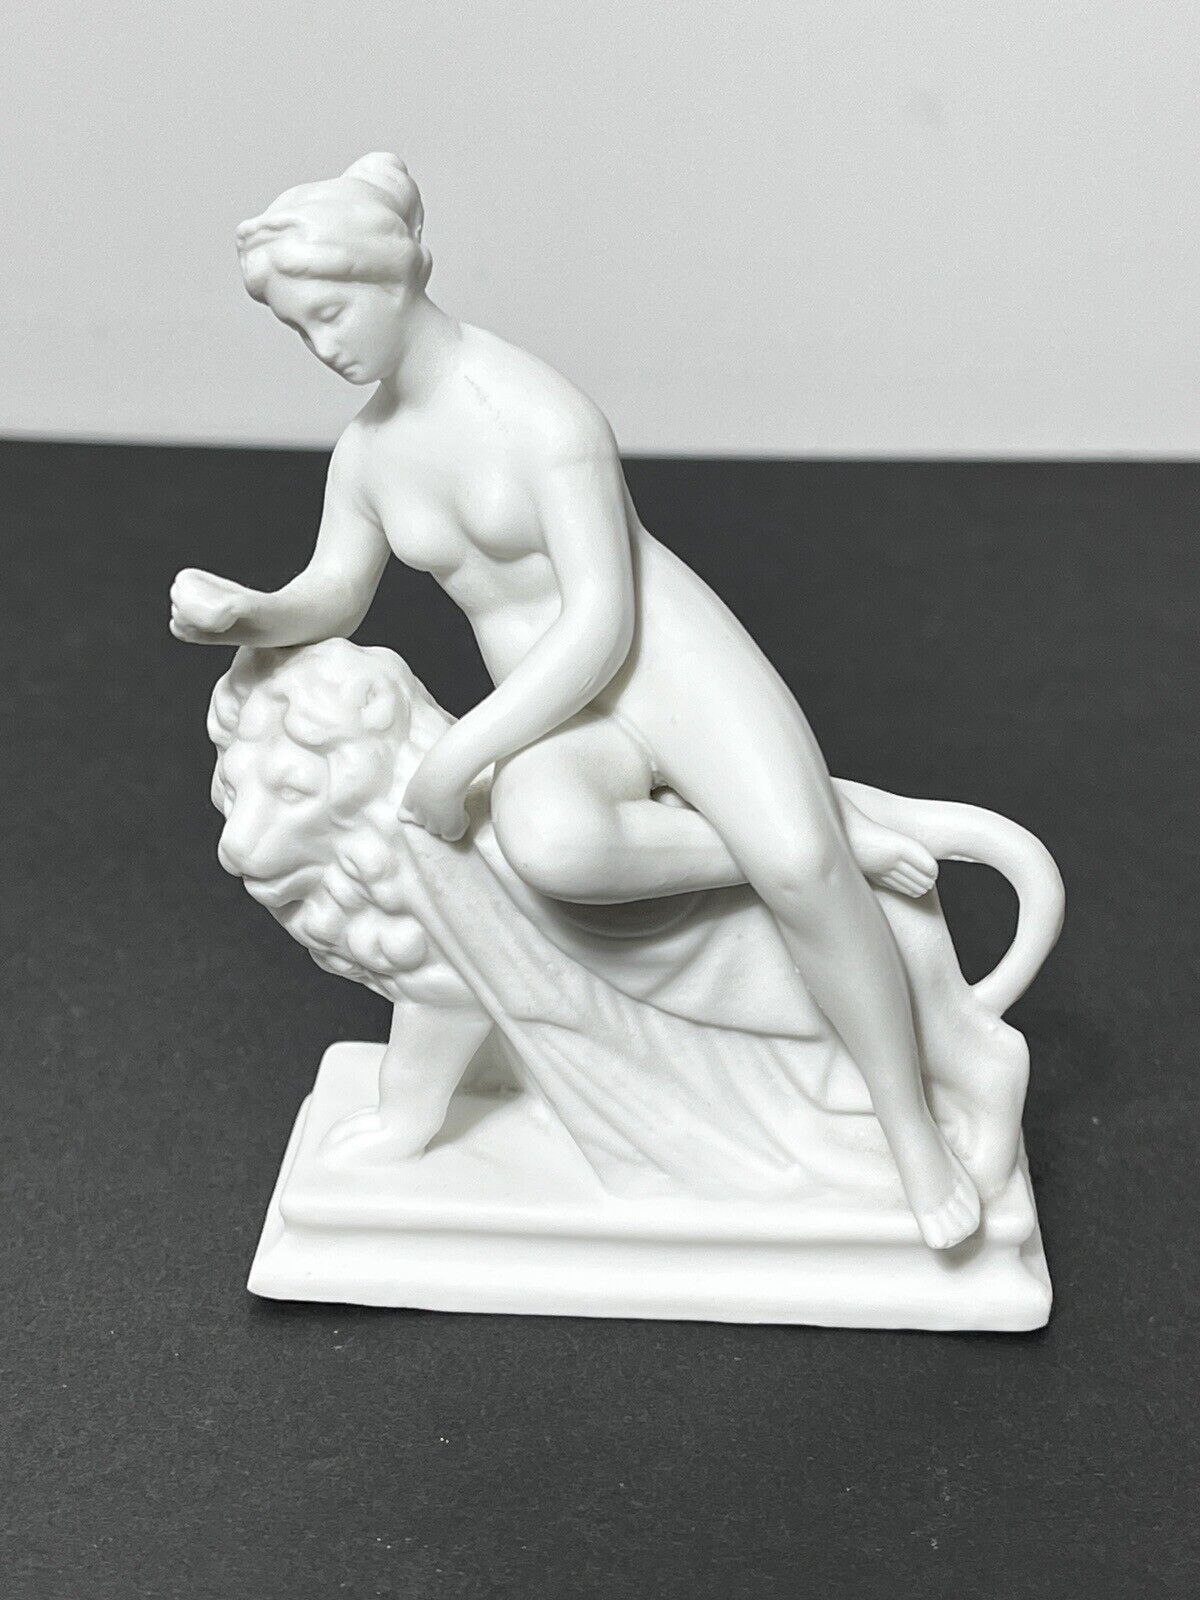 Antique Parian Ware \'Una and the Lion\' Miniature Figure Paperweight c1890. Minty